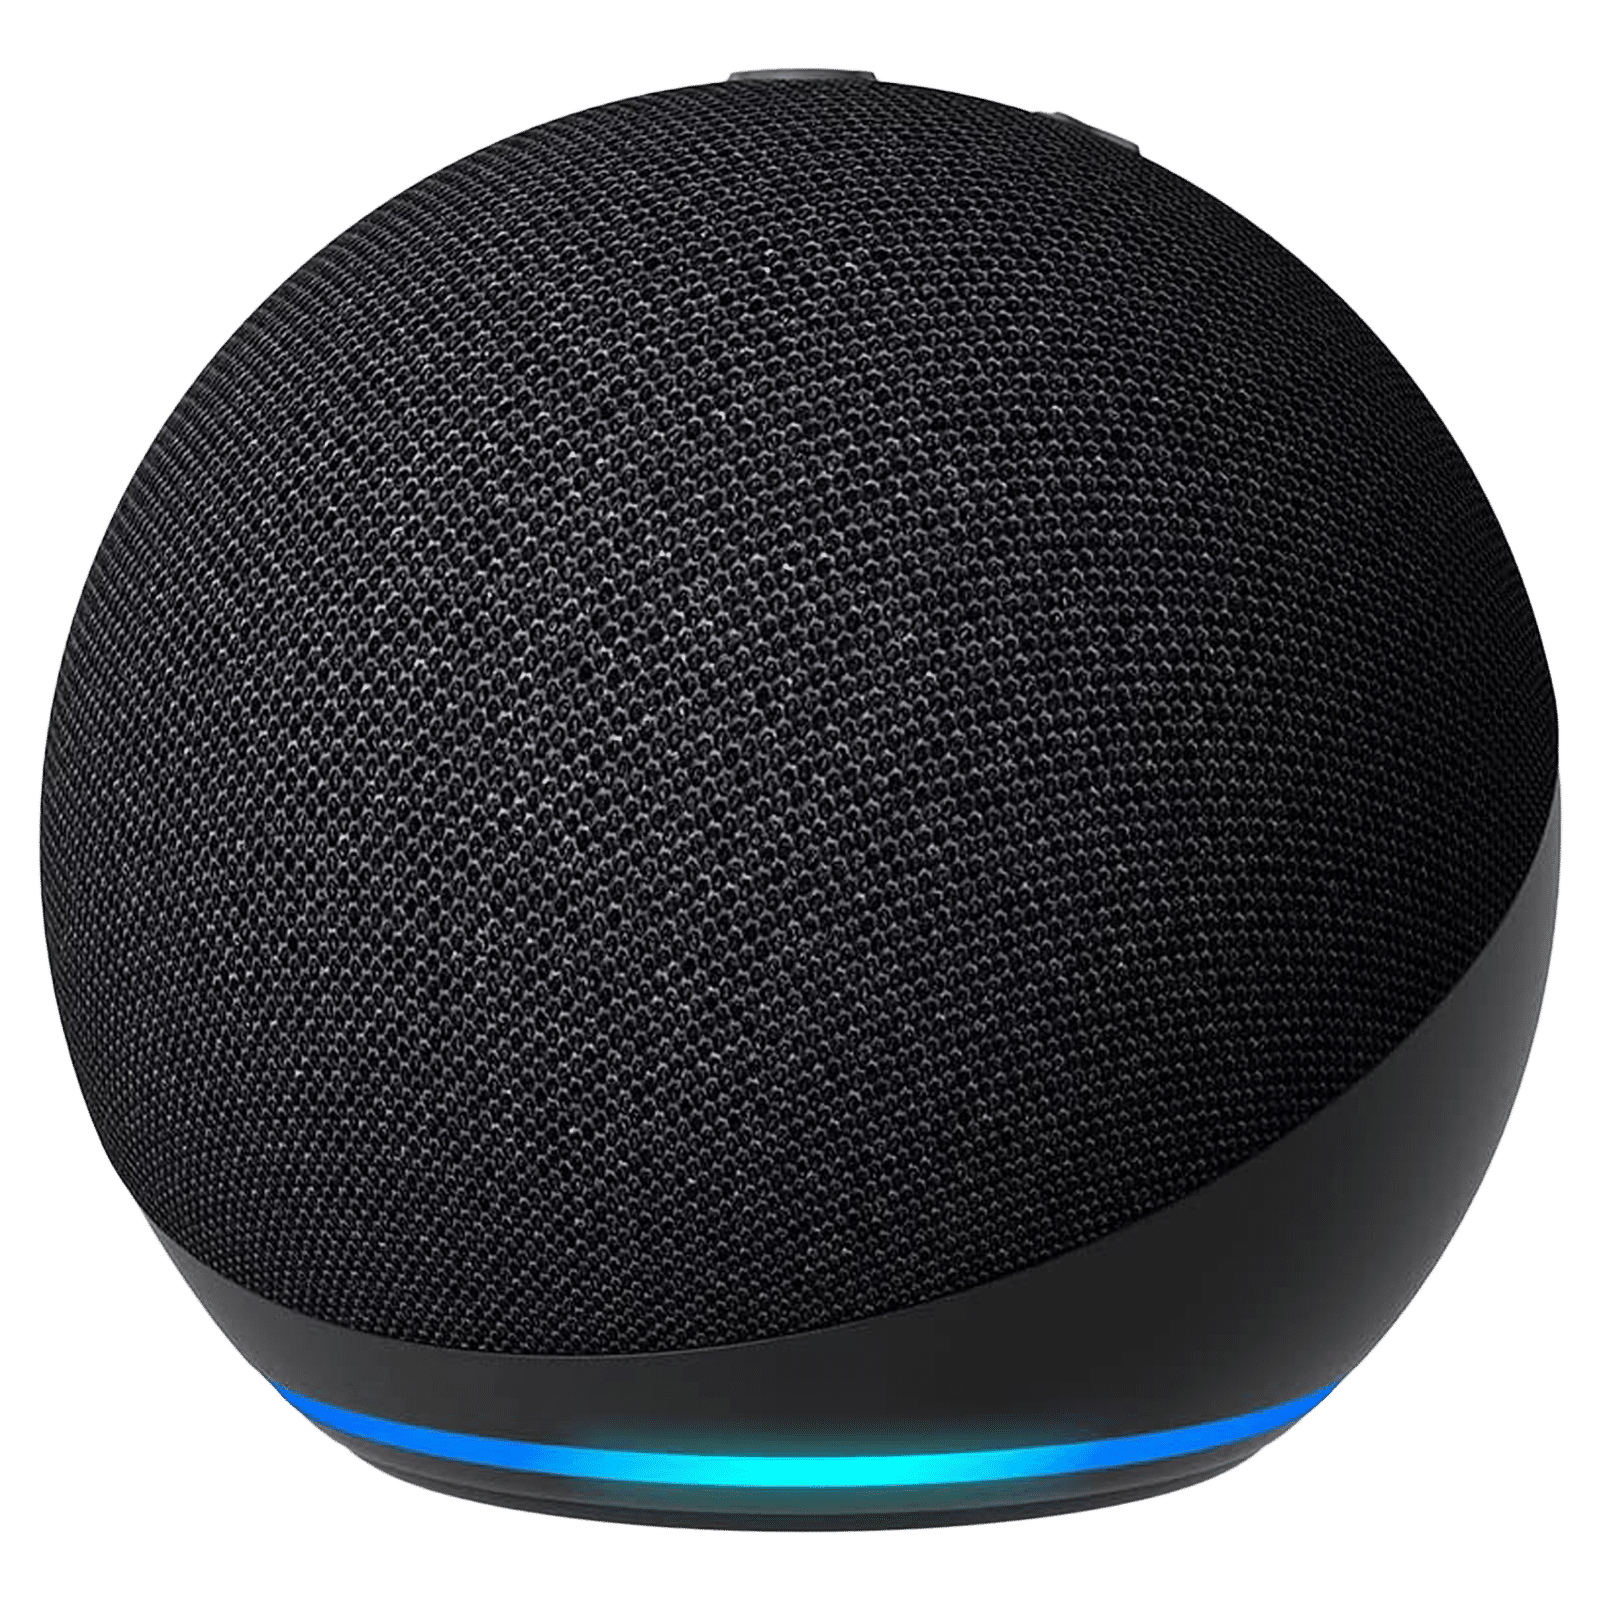 Alexa Mobile Accessories: A New Alexa-Enabled Product